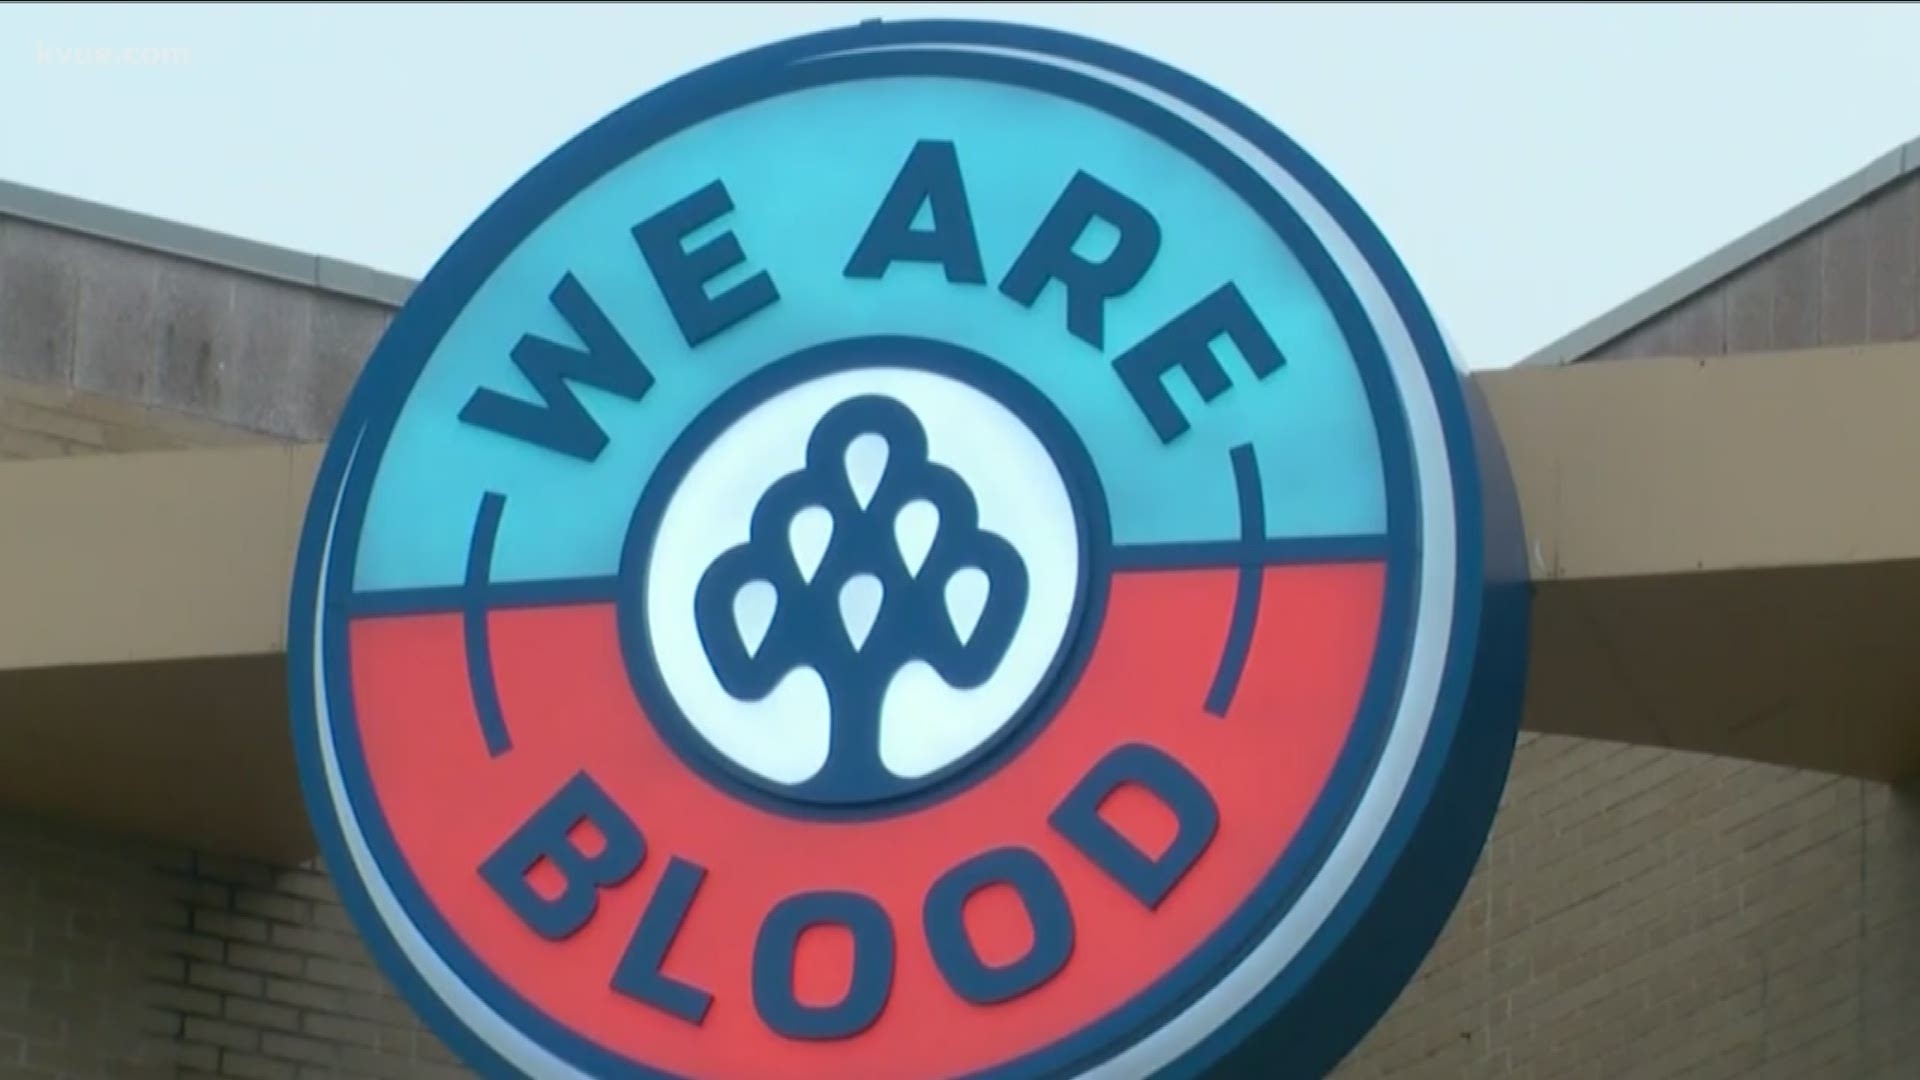 We are Blood wants the patients to donate to give to people who are still sick.